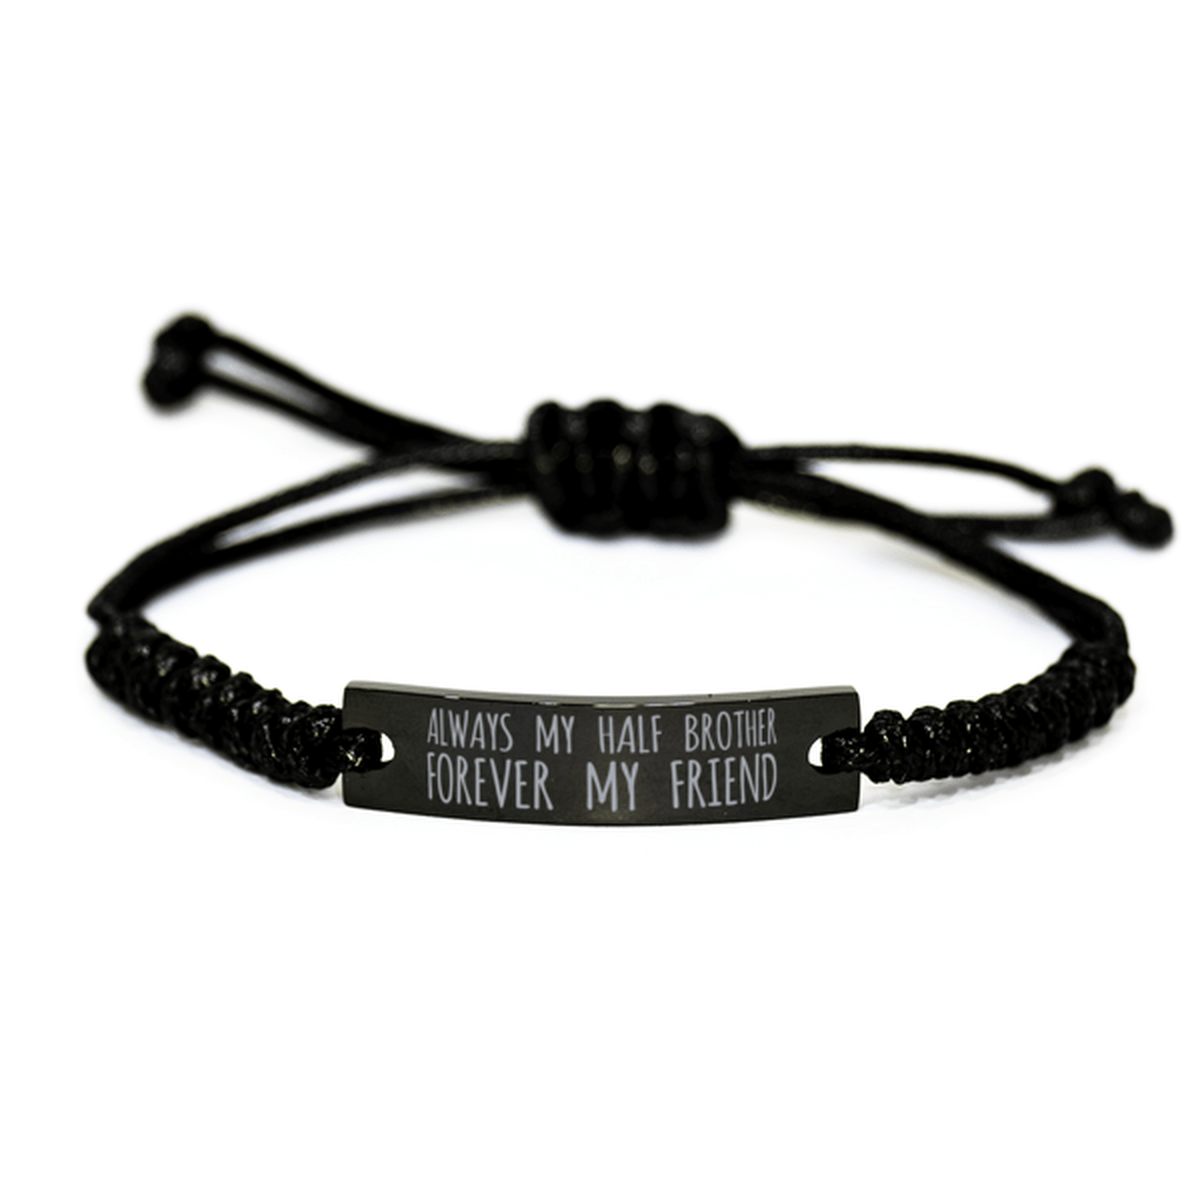 Inspirational Half Brother Black Rope Bracelet, Always My Half Brother Forever My Friend, Best Birthday Gifts For Family